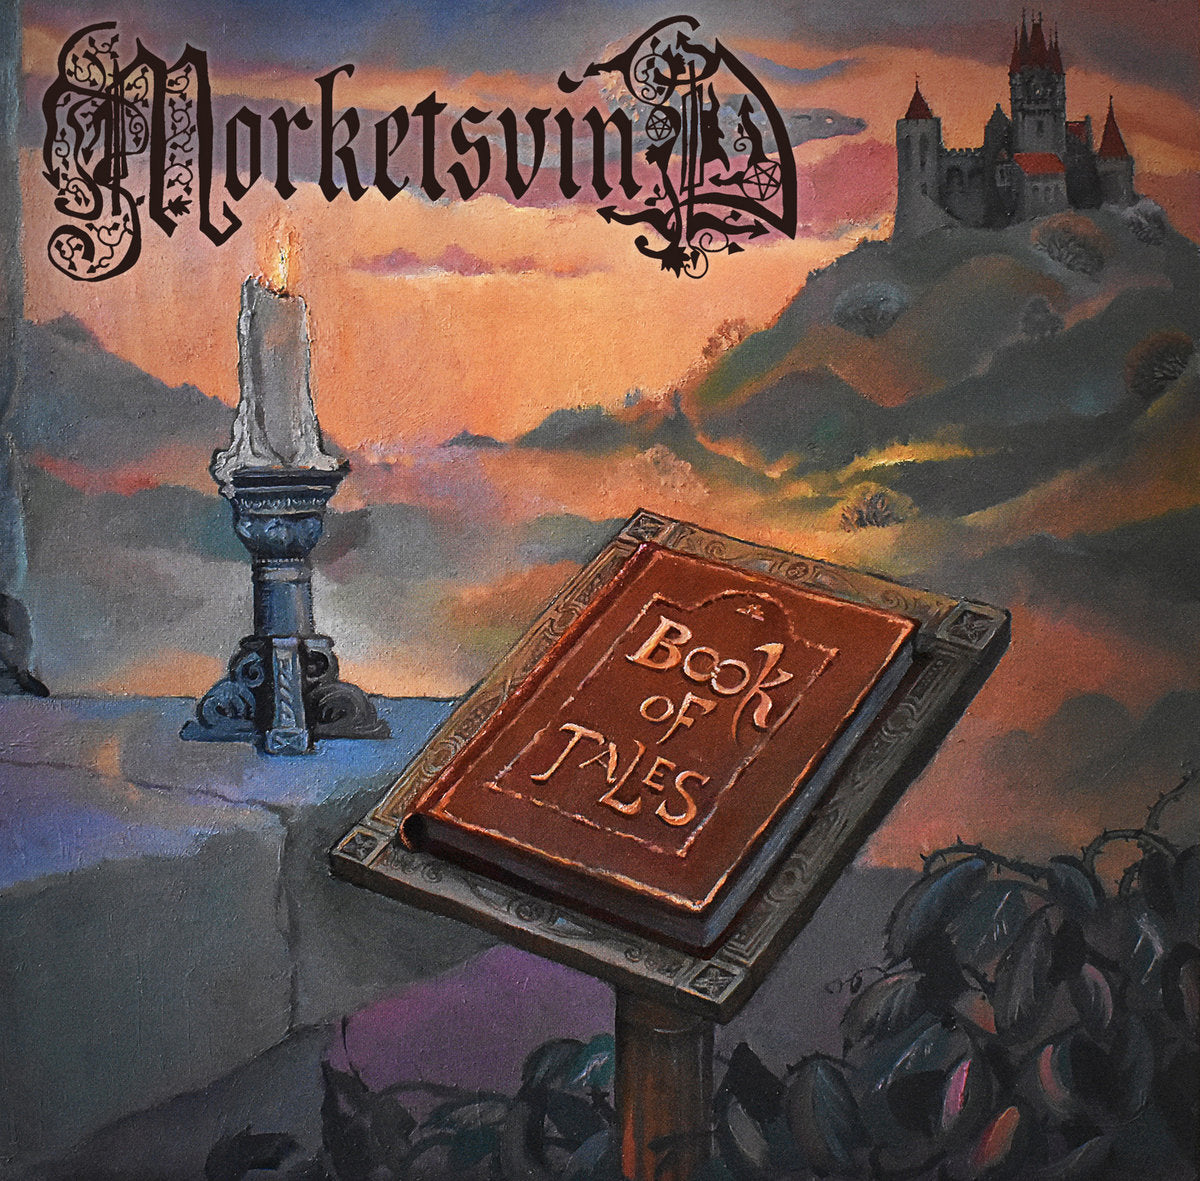 [SOLD OUT] MORKETSVIND "Book of Tales" Cassette Tape (Lim. 100)